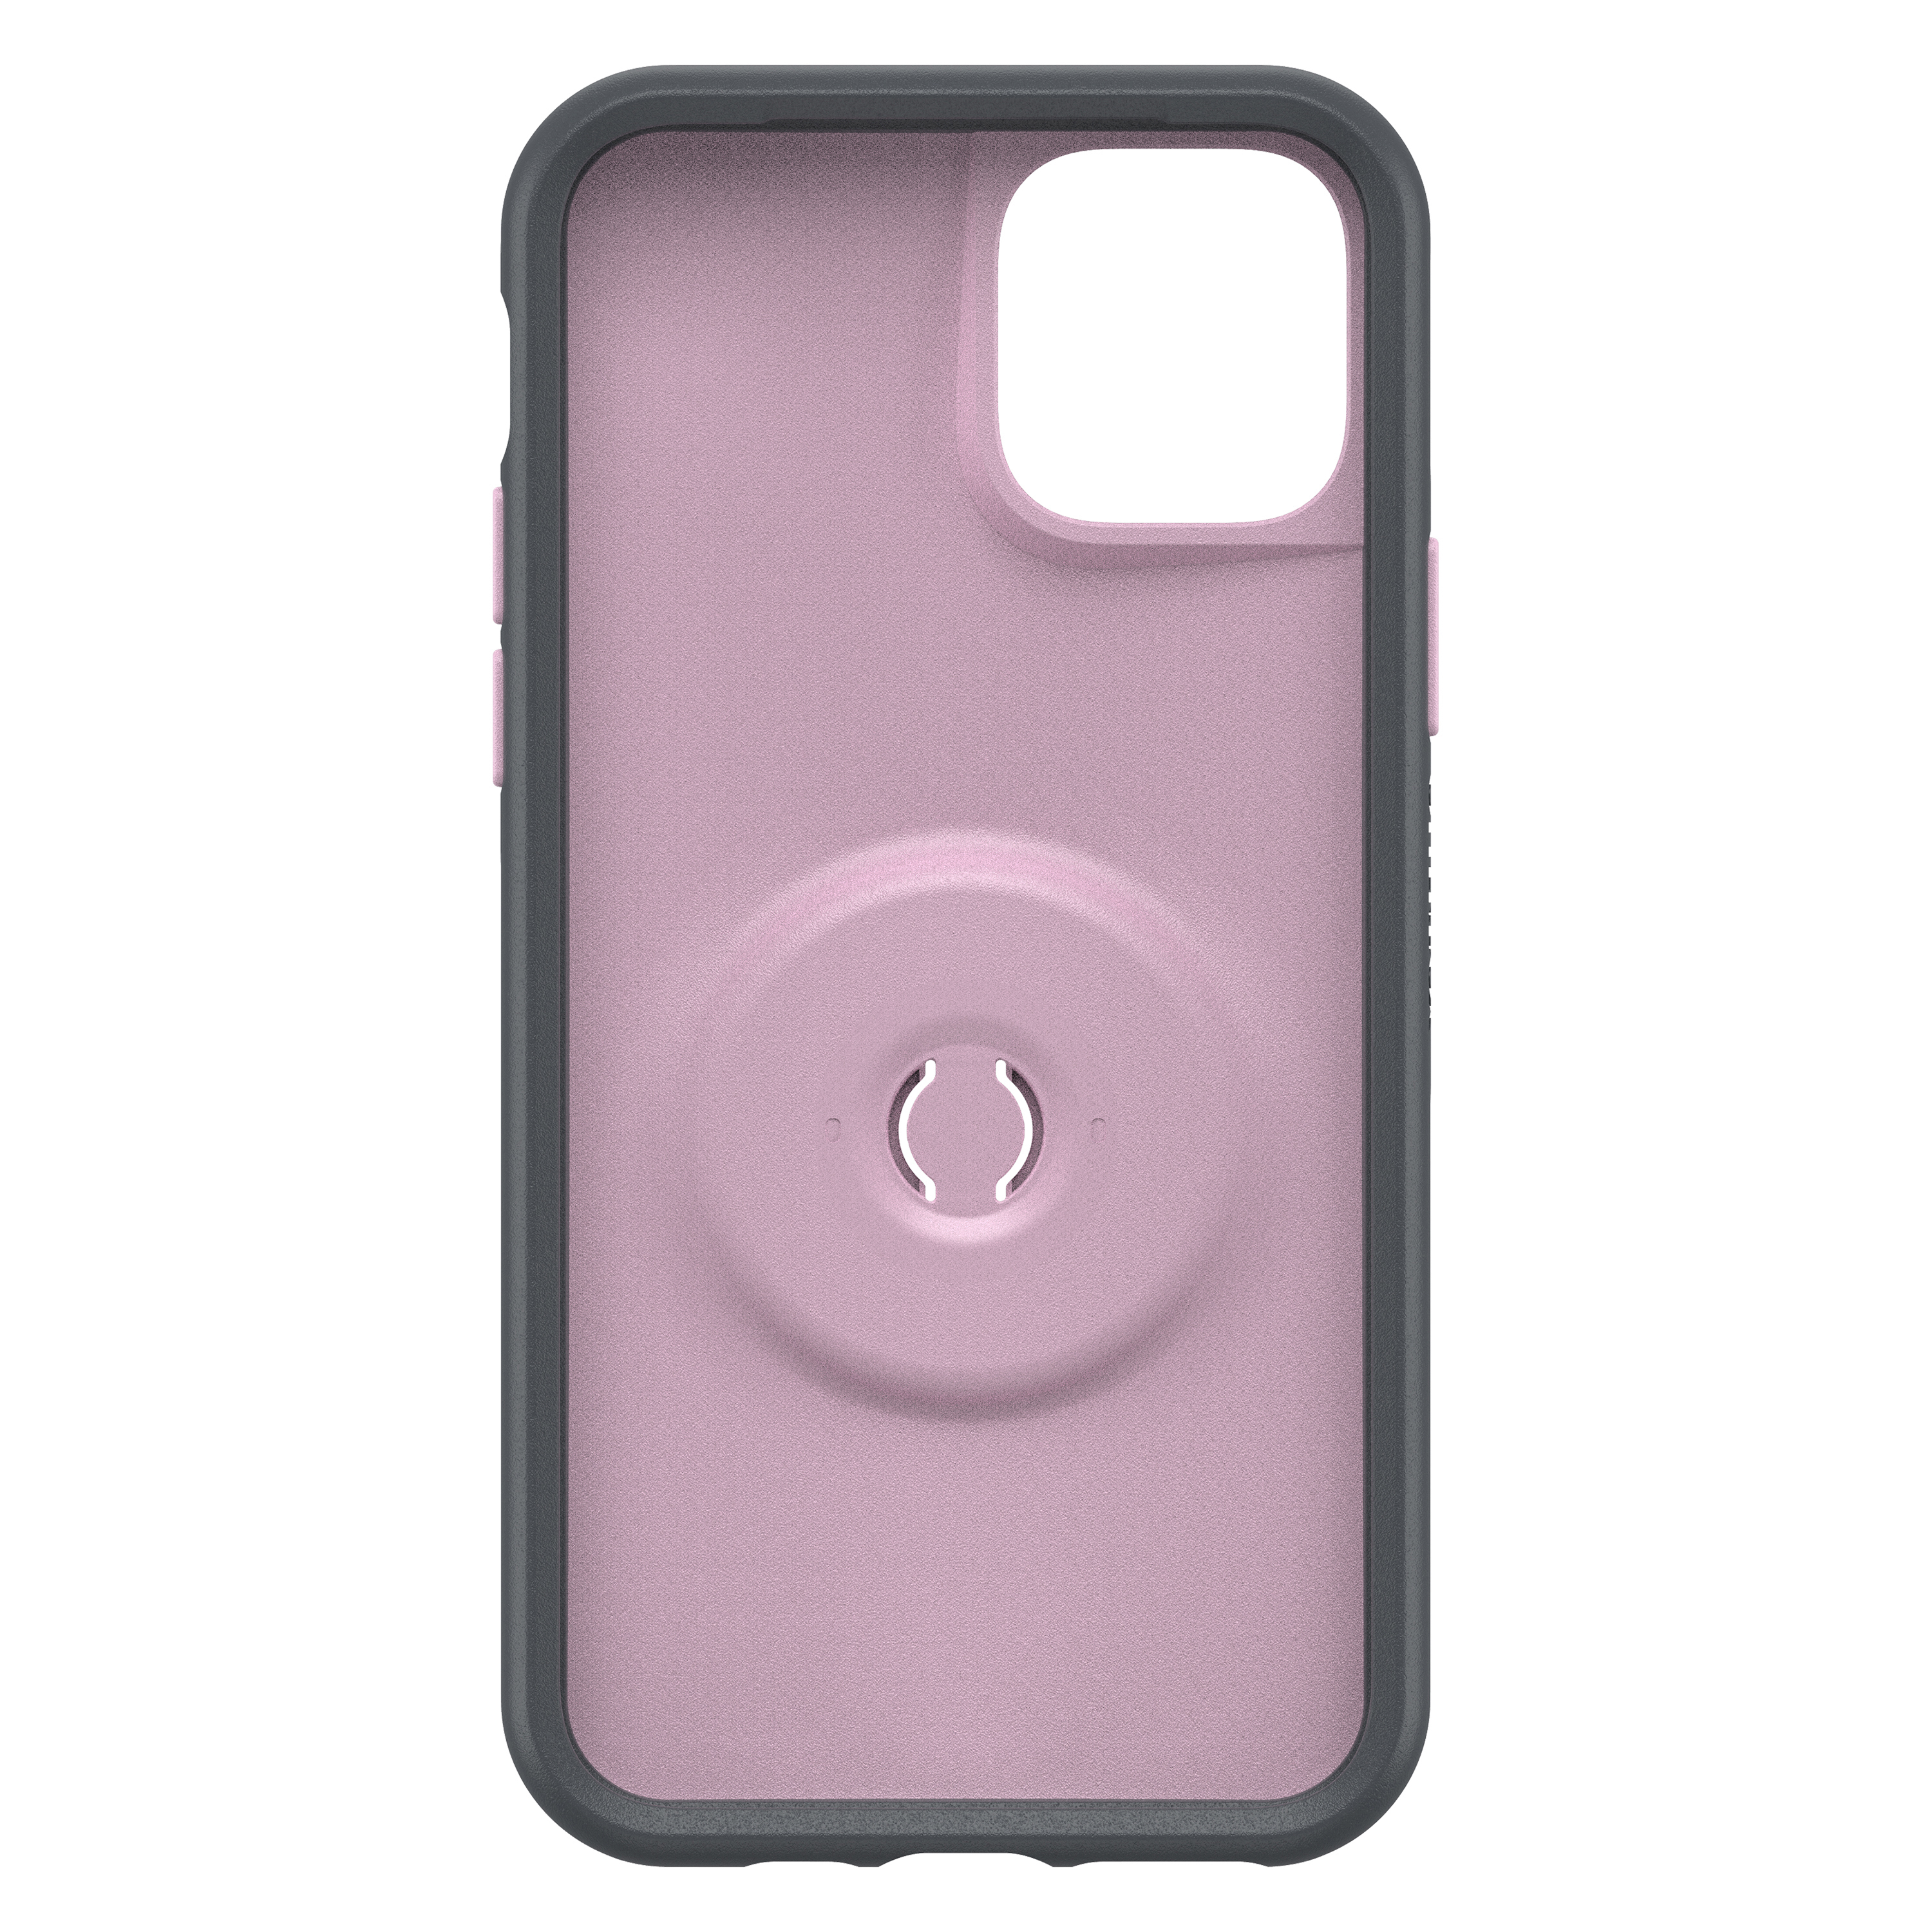 Pro, 11 iPhone Symmetry, Apple, OTTERBOX Rosa Backcover,